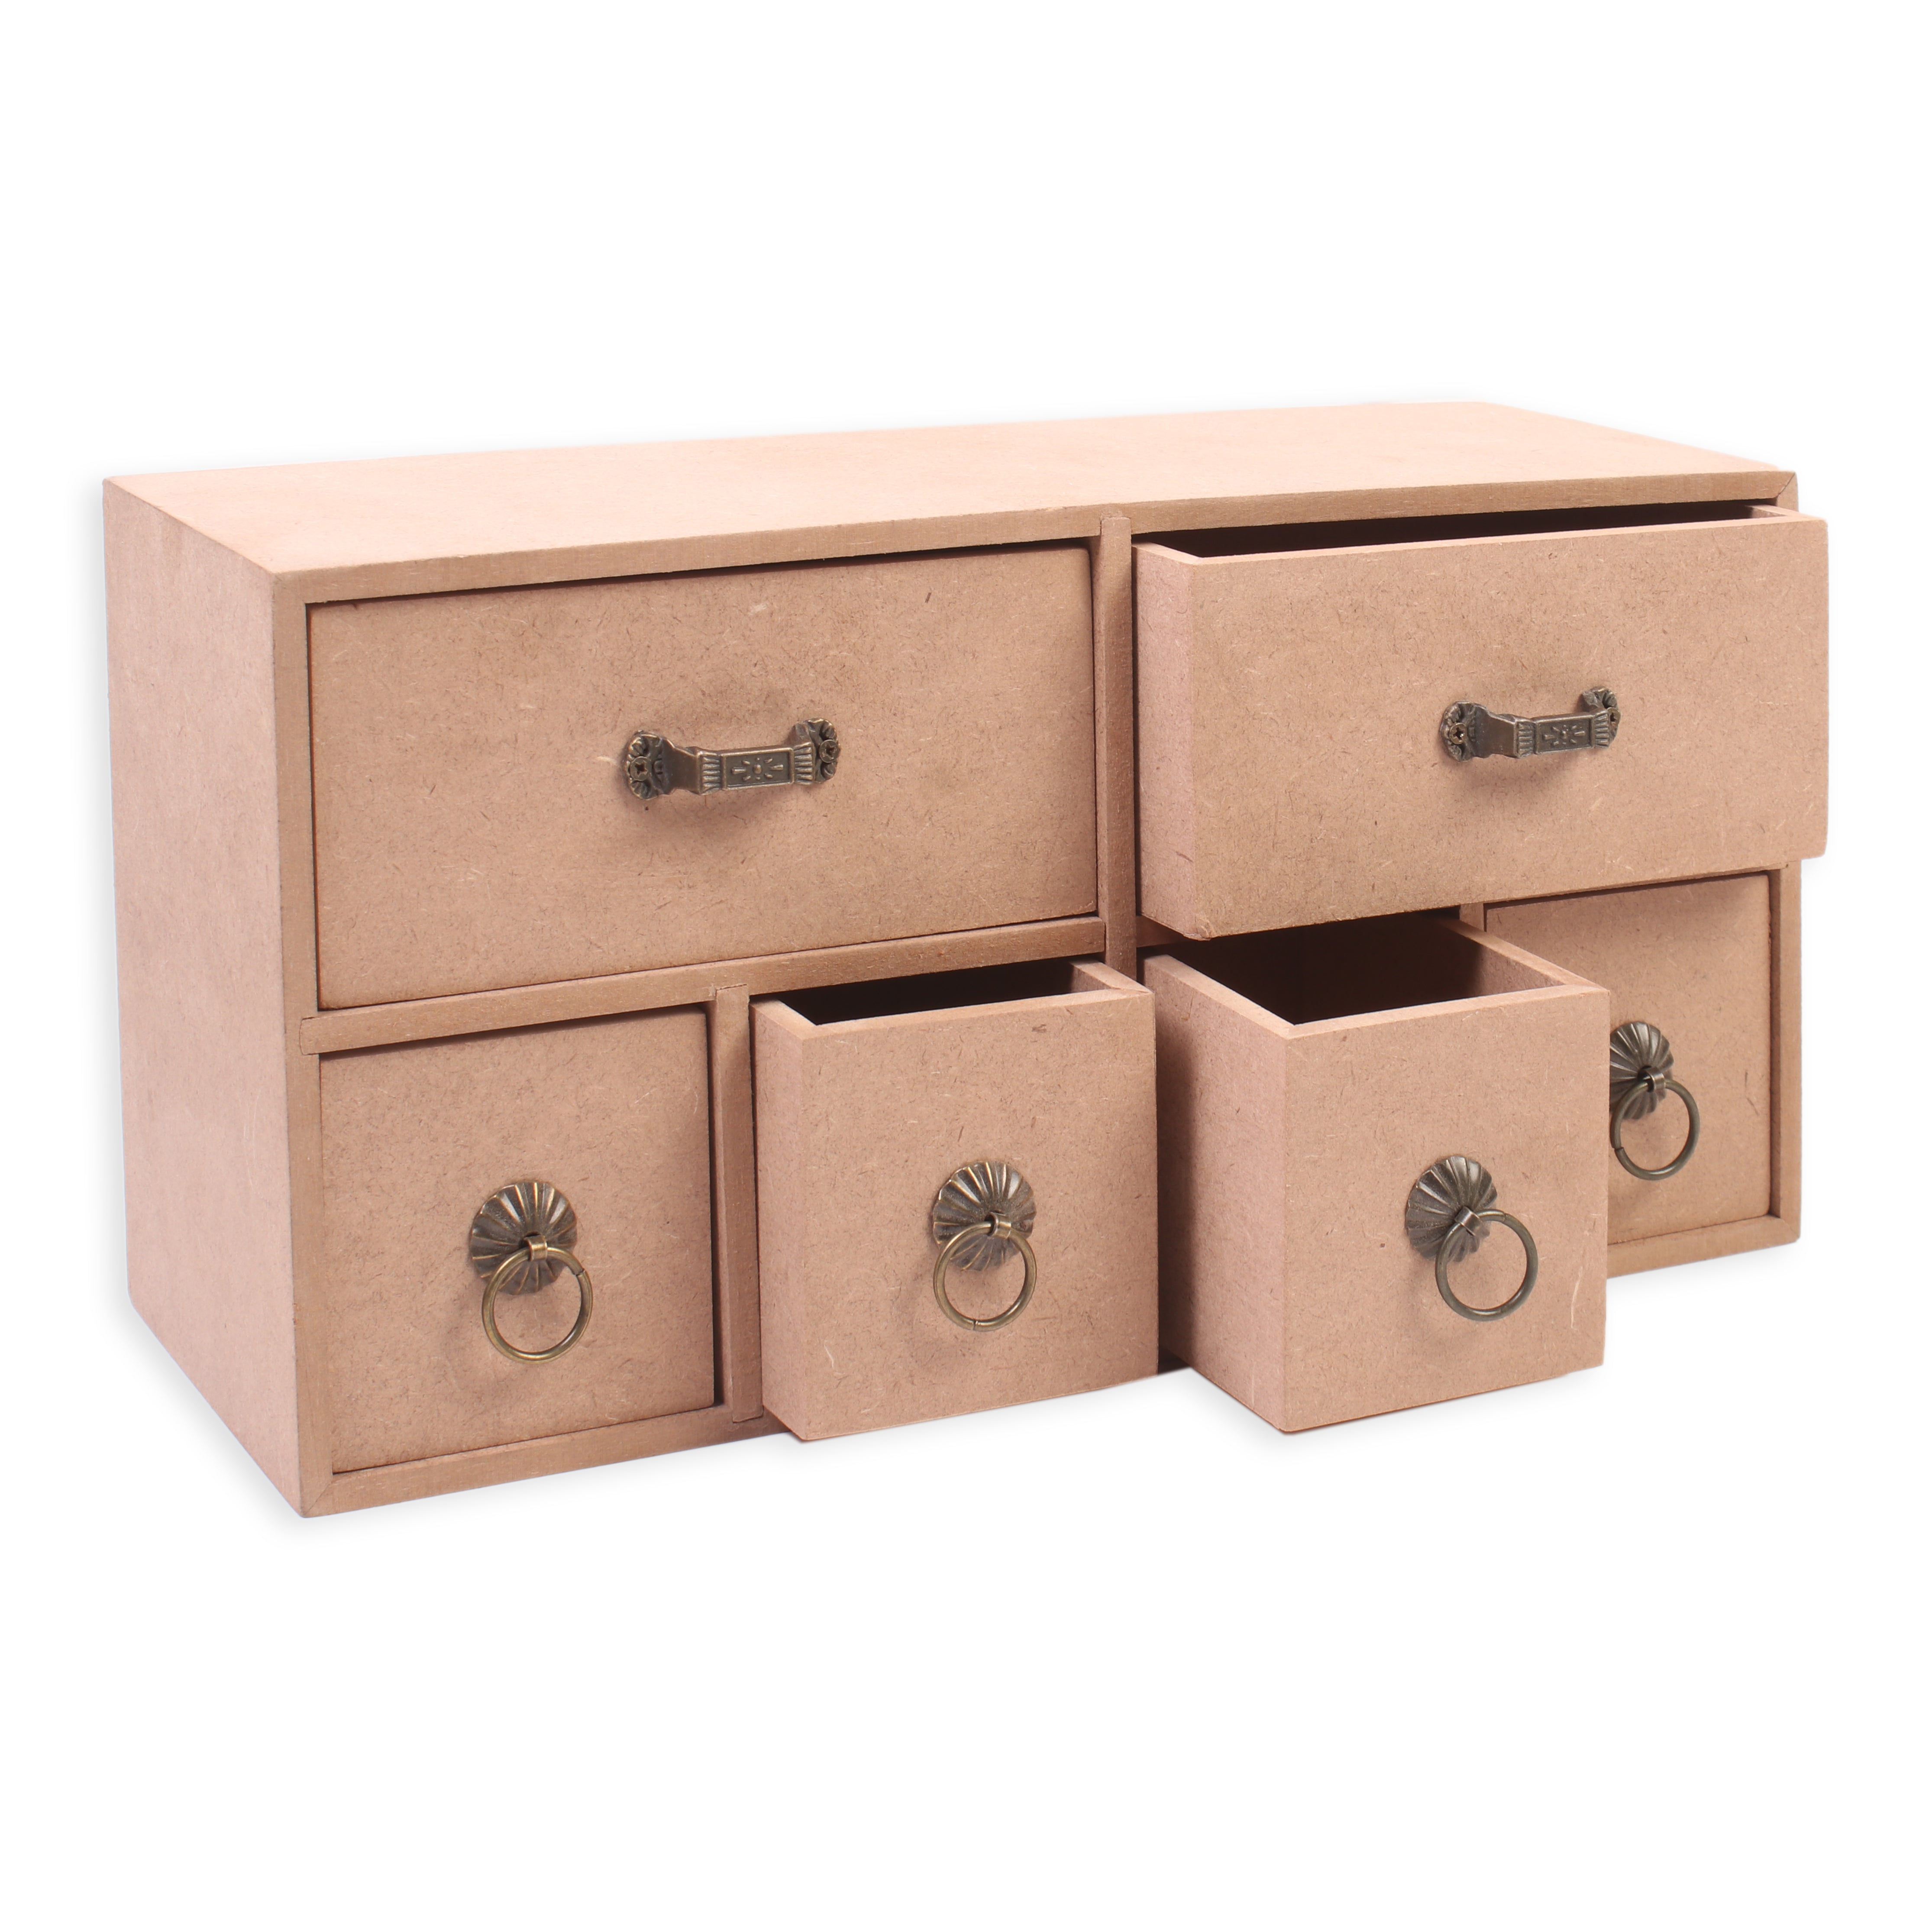 Mdf Table Organizer Chest Of 6 Drawers Approx L30.4 X W10.1 X D15.2Cm 5.5Mm Thick 1Pc Lb